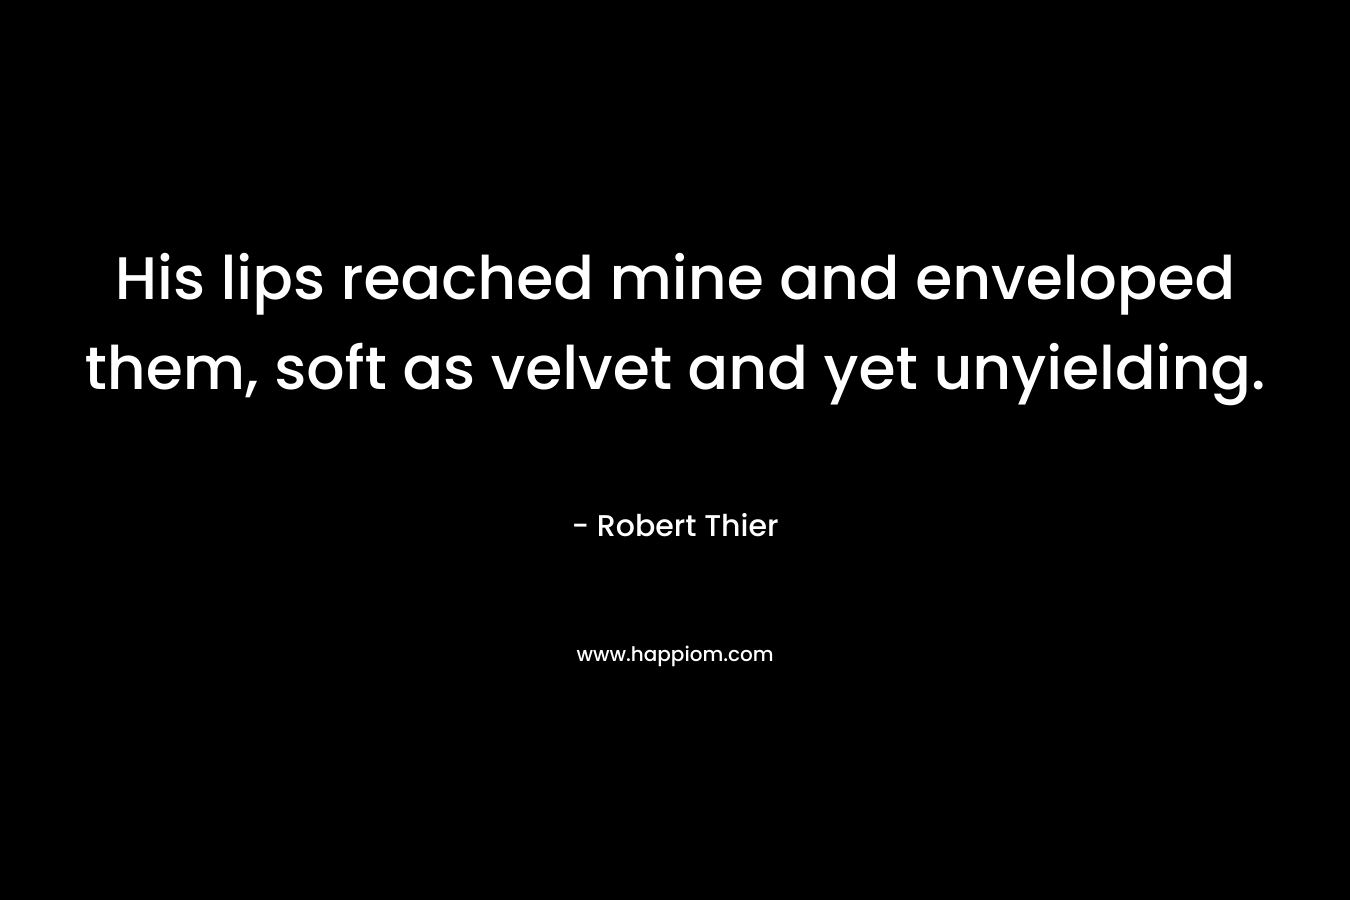 His lips reached mine and enveloped them, soft as velvet and yet unyielding.